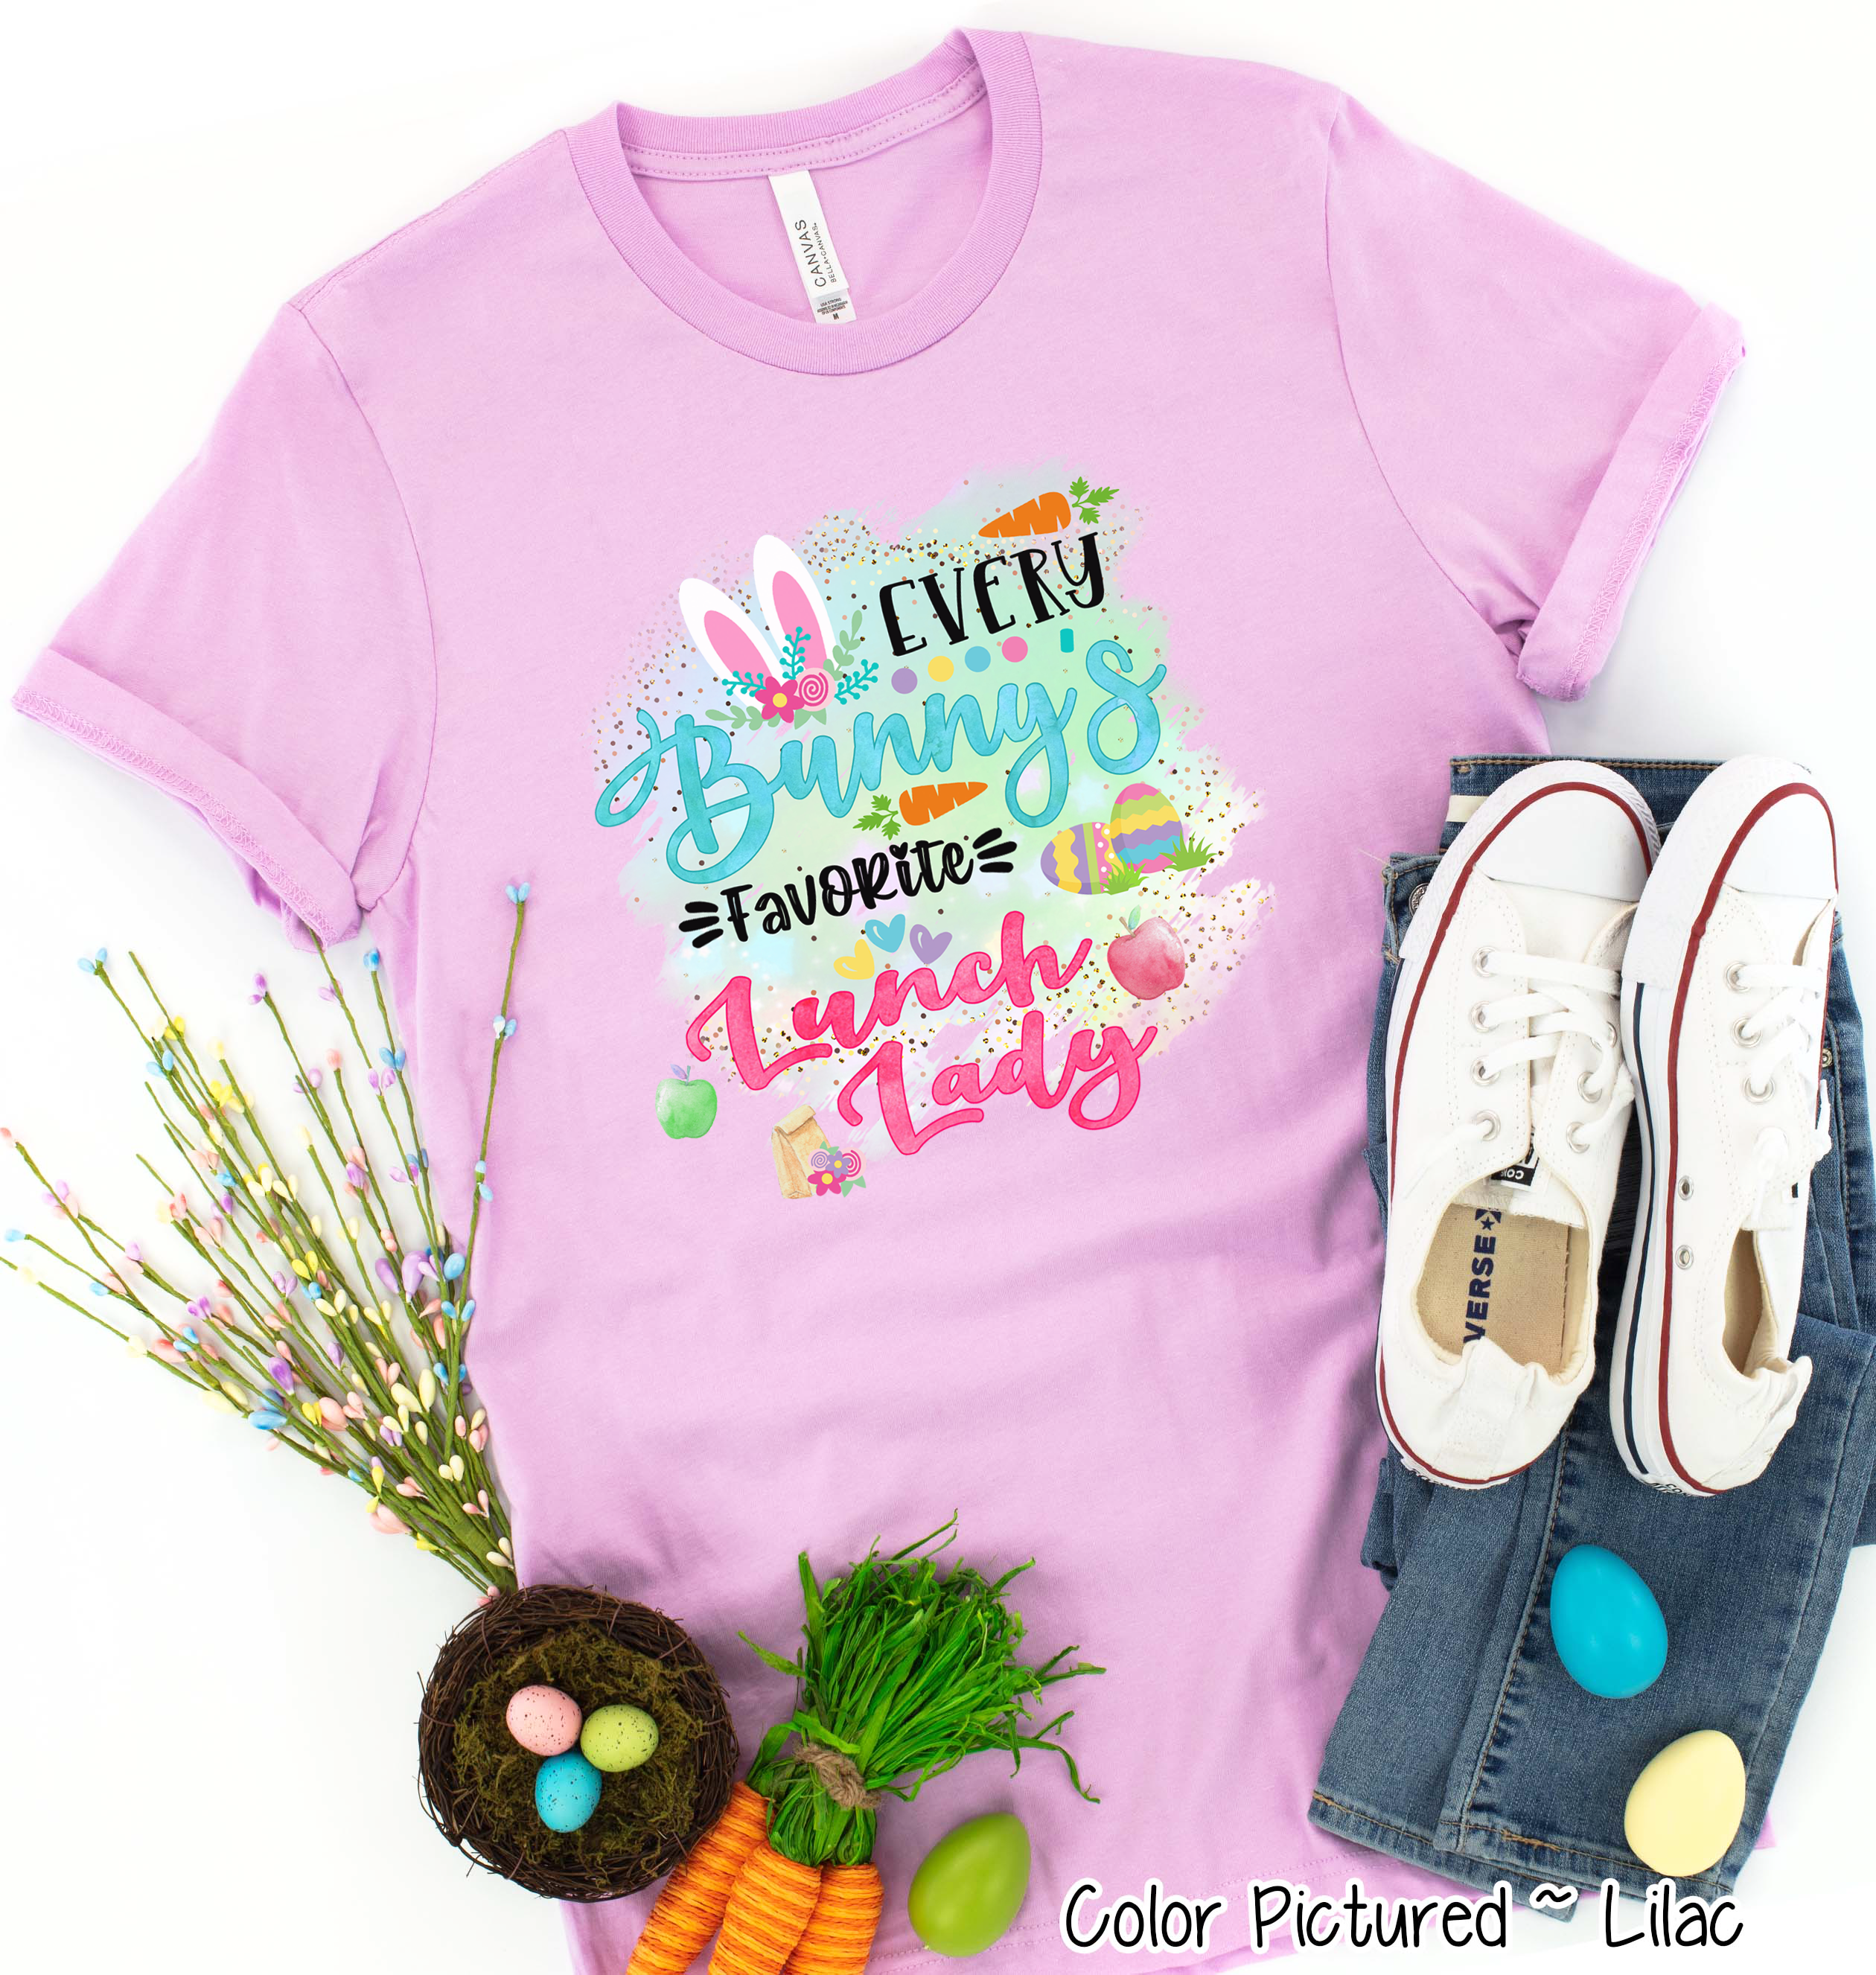 Every Bunny's Favorite Lunch Lady Easter Tee